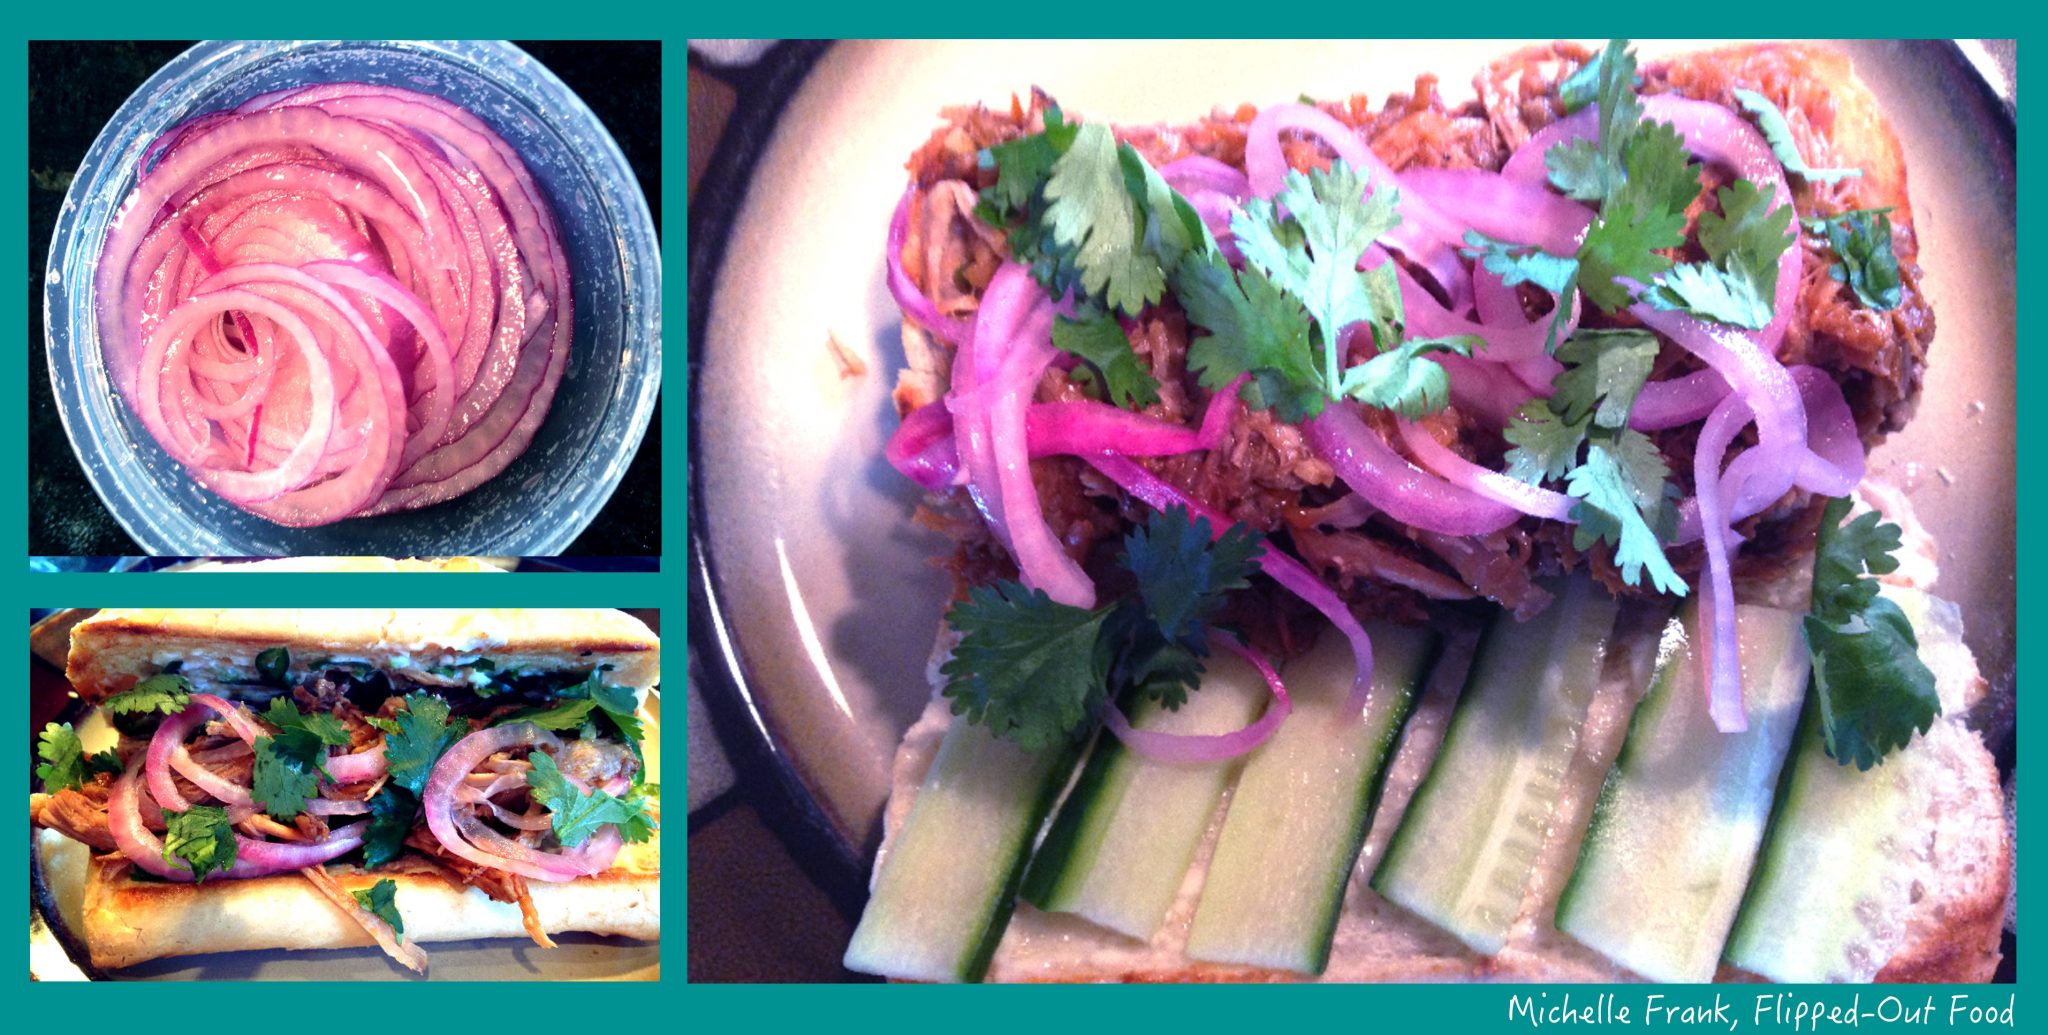 crockpot banh mi sandwiches: the pickled red onion, open-faced, and ready-to-eat.